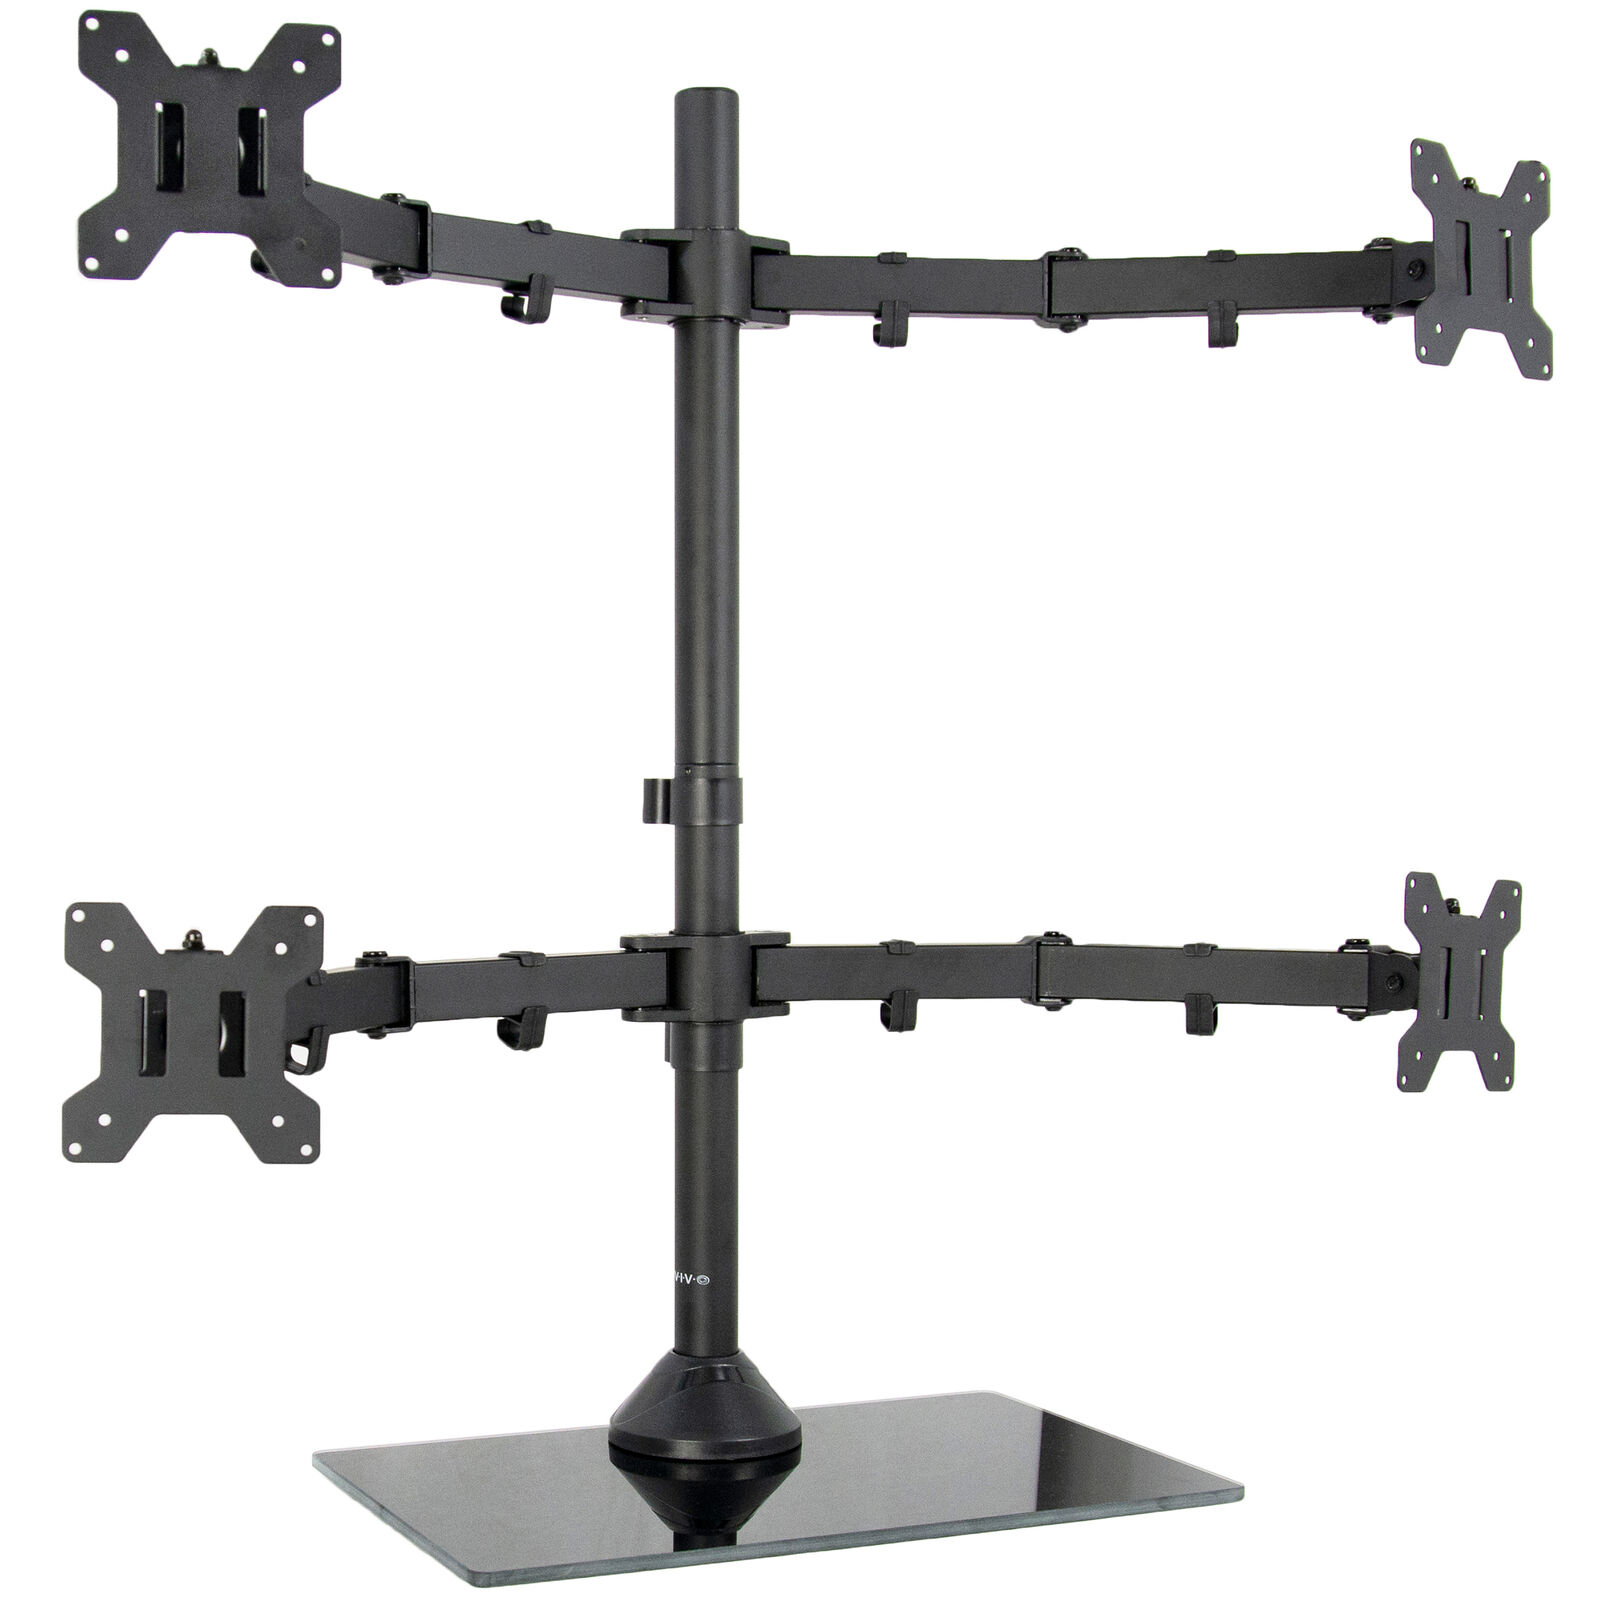 VIVO Quad Monitor Desk Stand Mount Freestanding Glass Base | 4 Screens up to 27